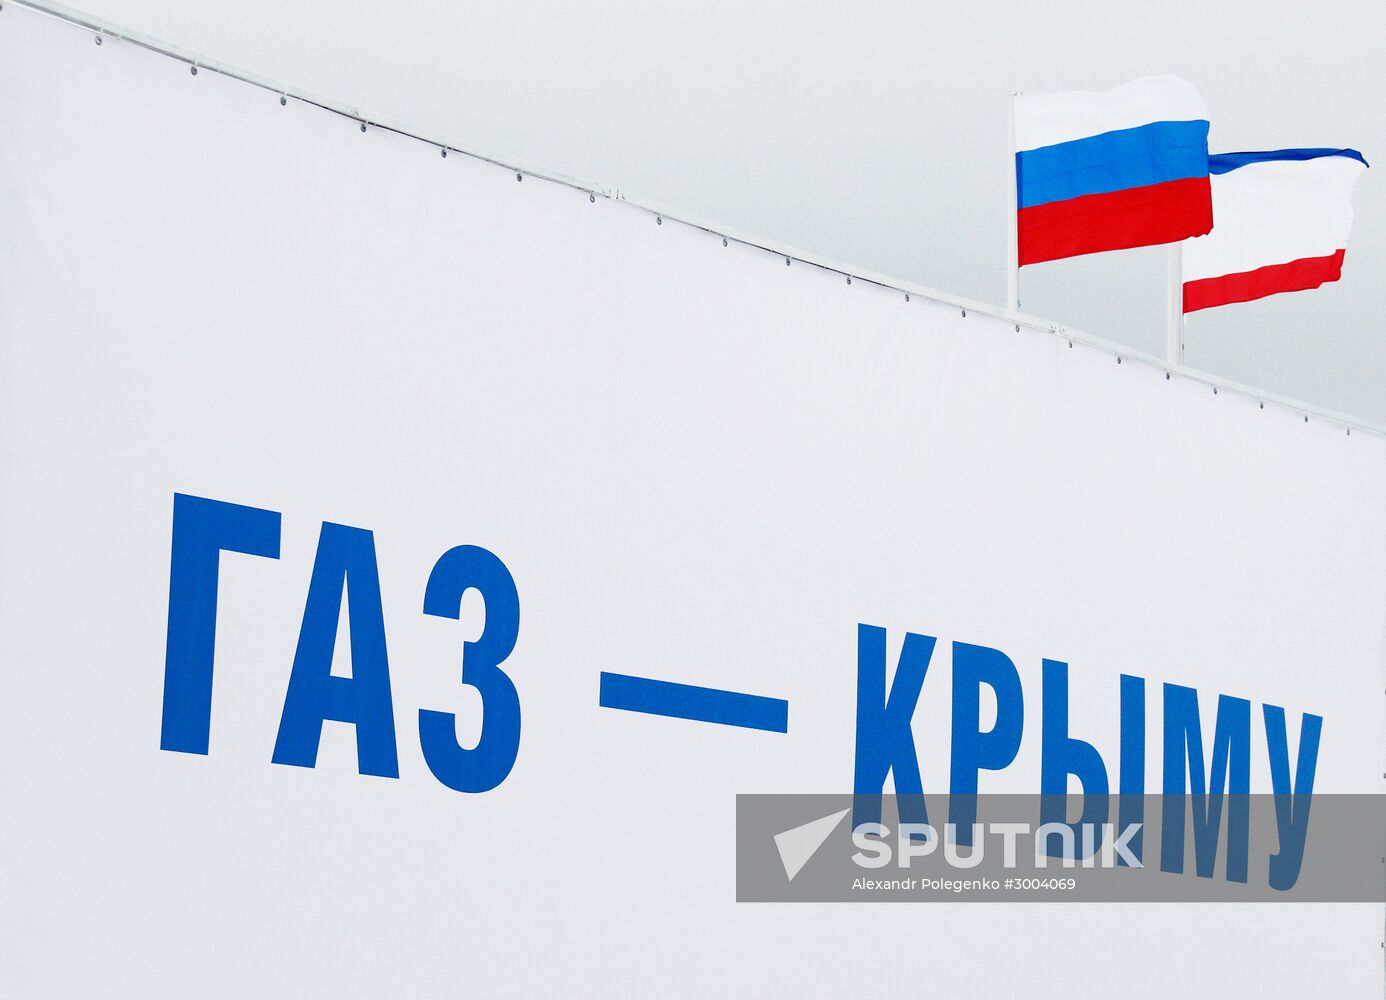 Natural gas from mainland Russia goes to Crimea